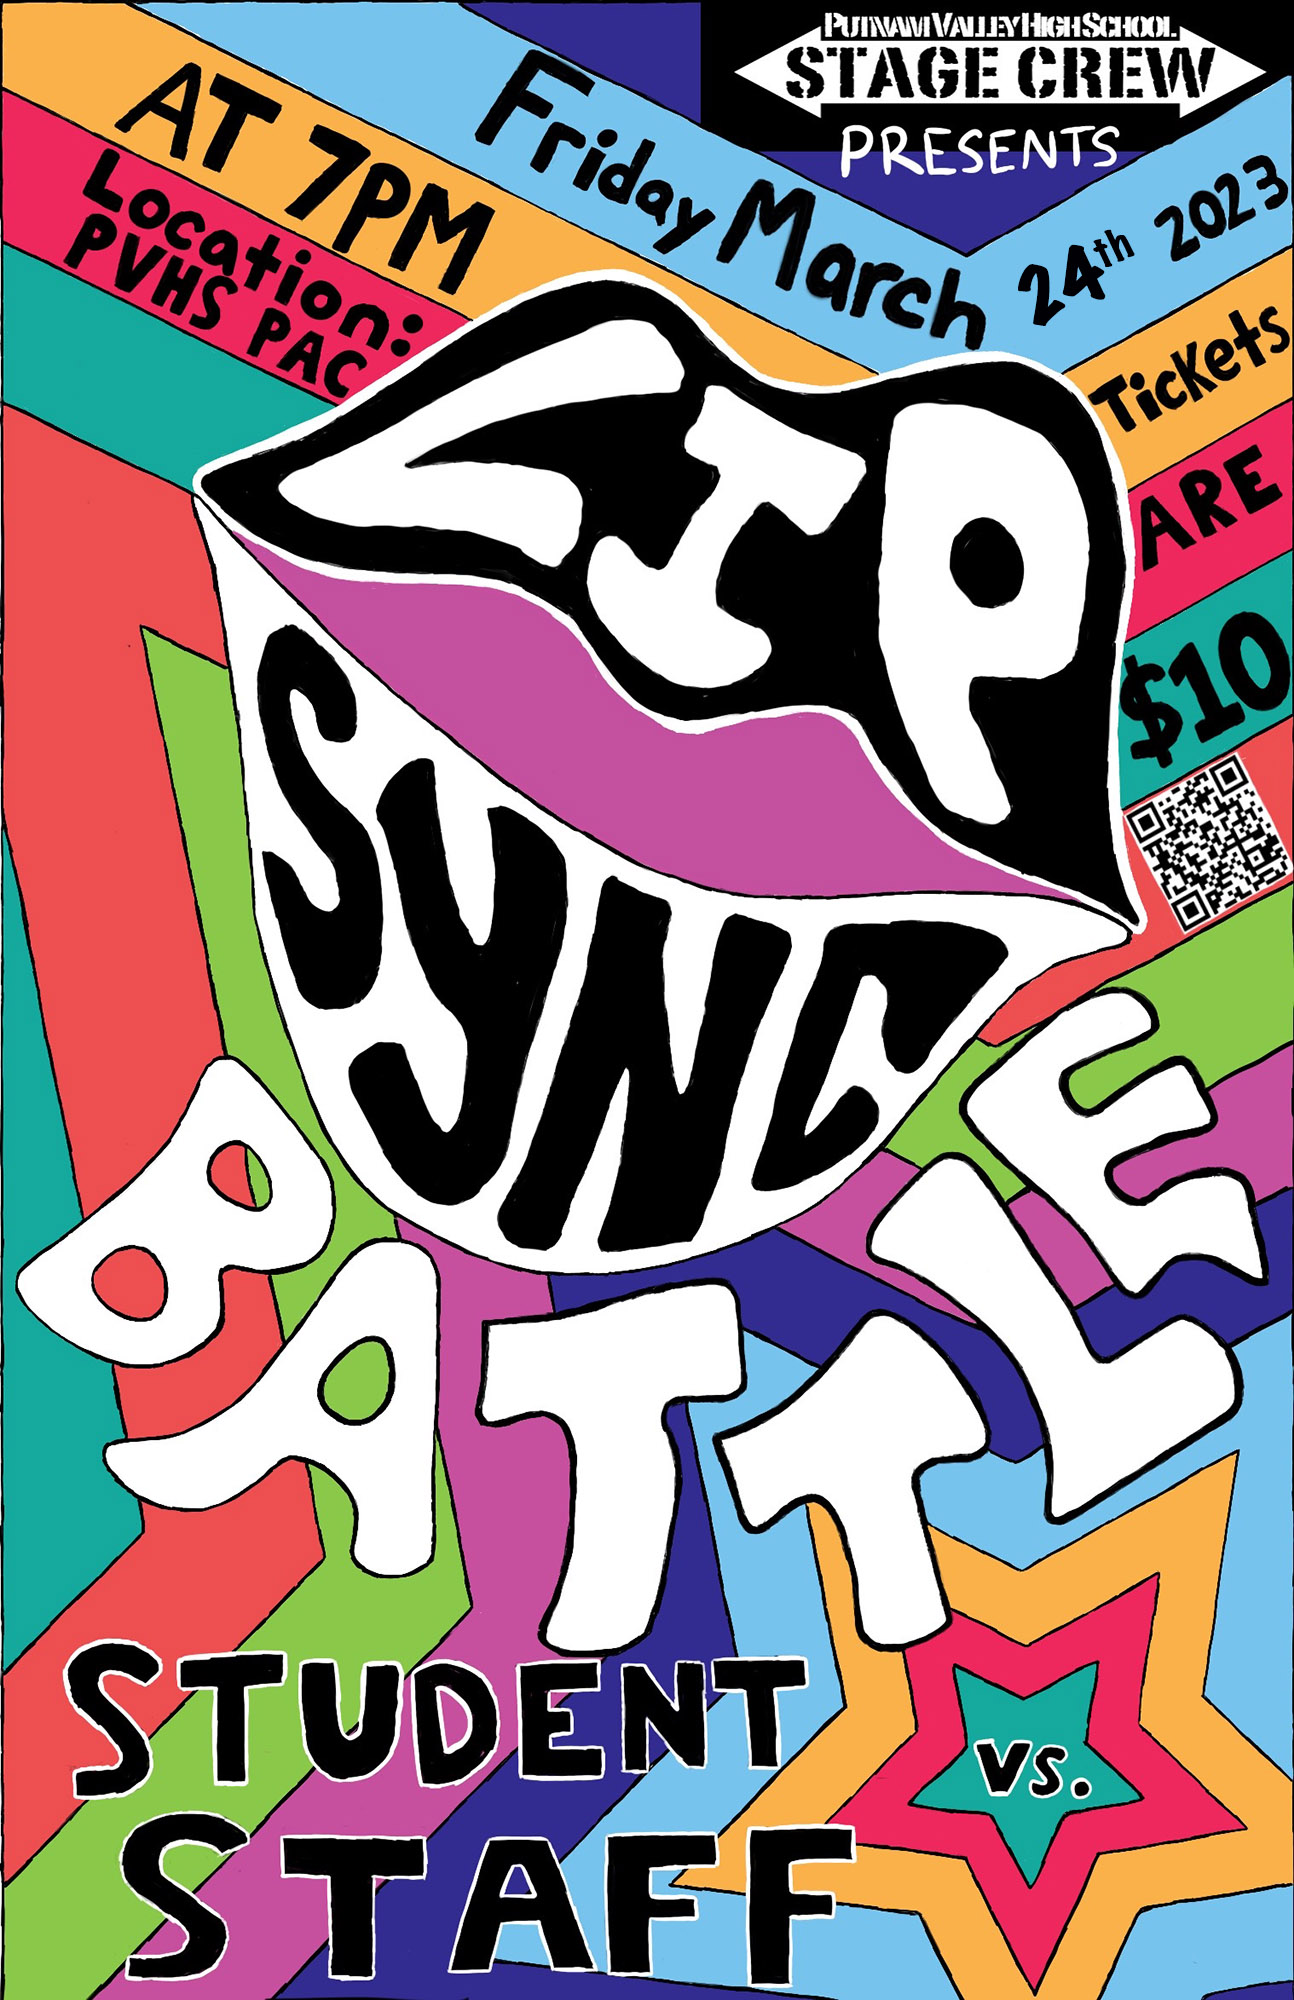 PVHS Lip Sync Battle - Click Here for Tickets